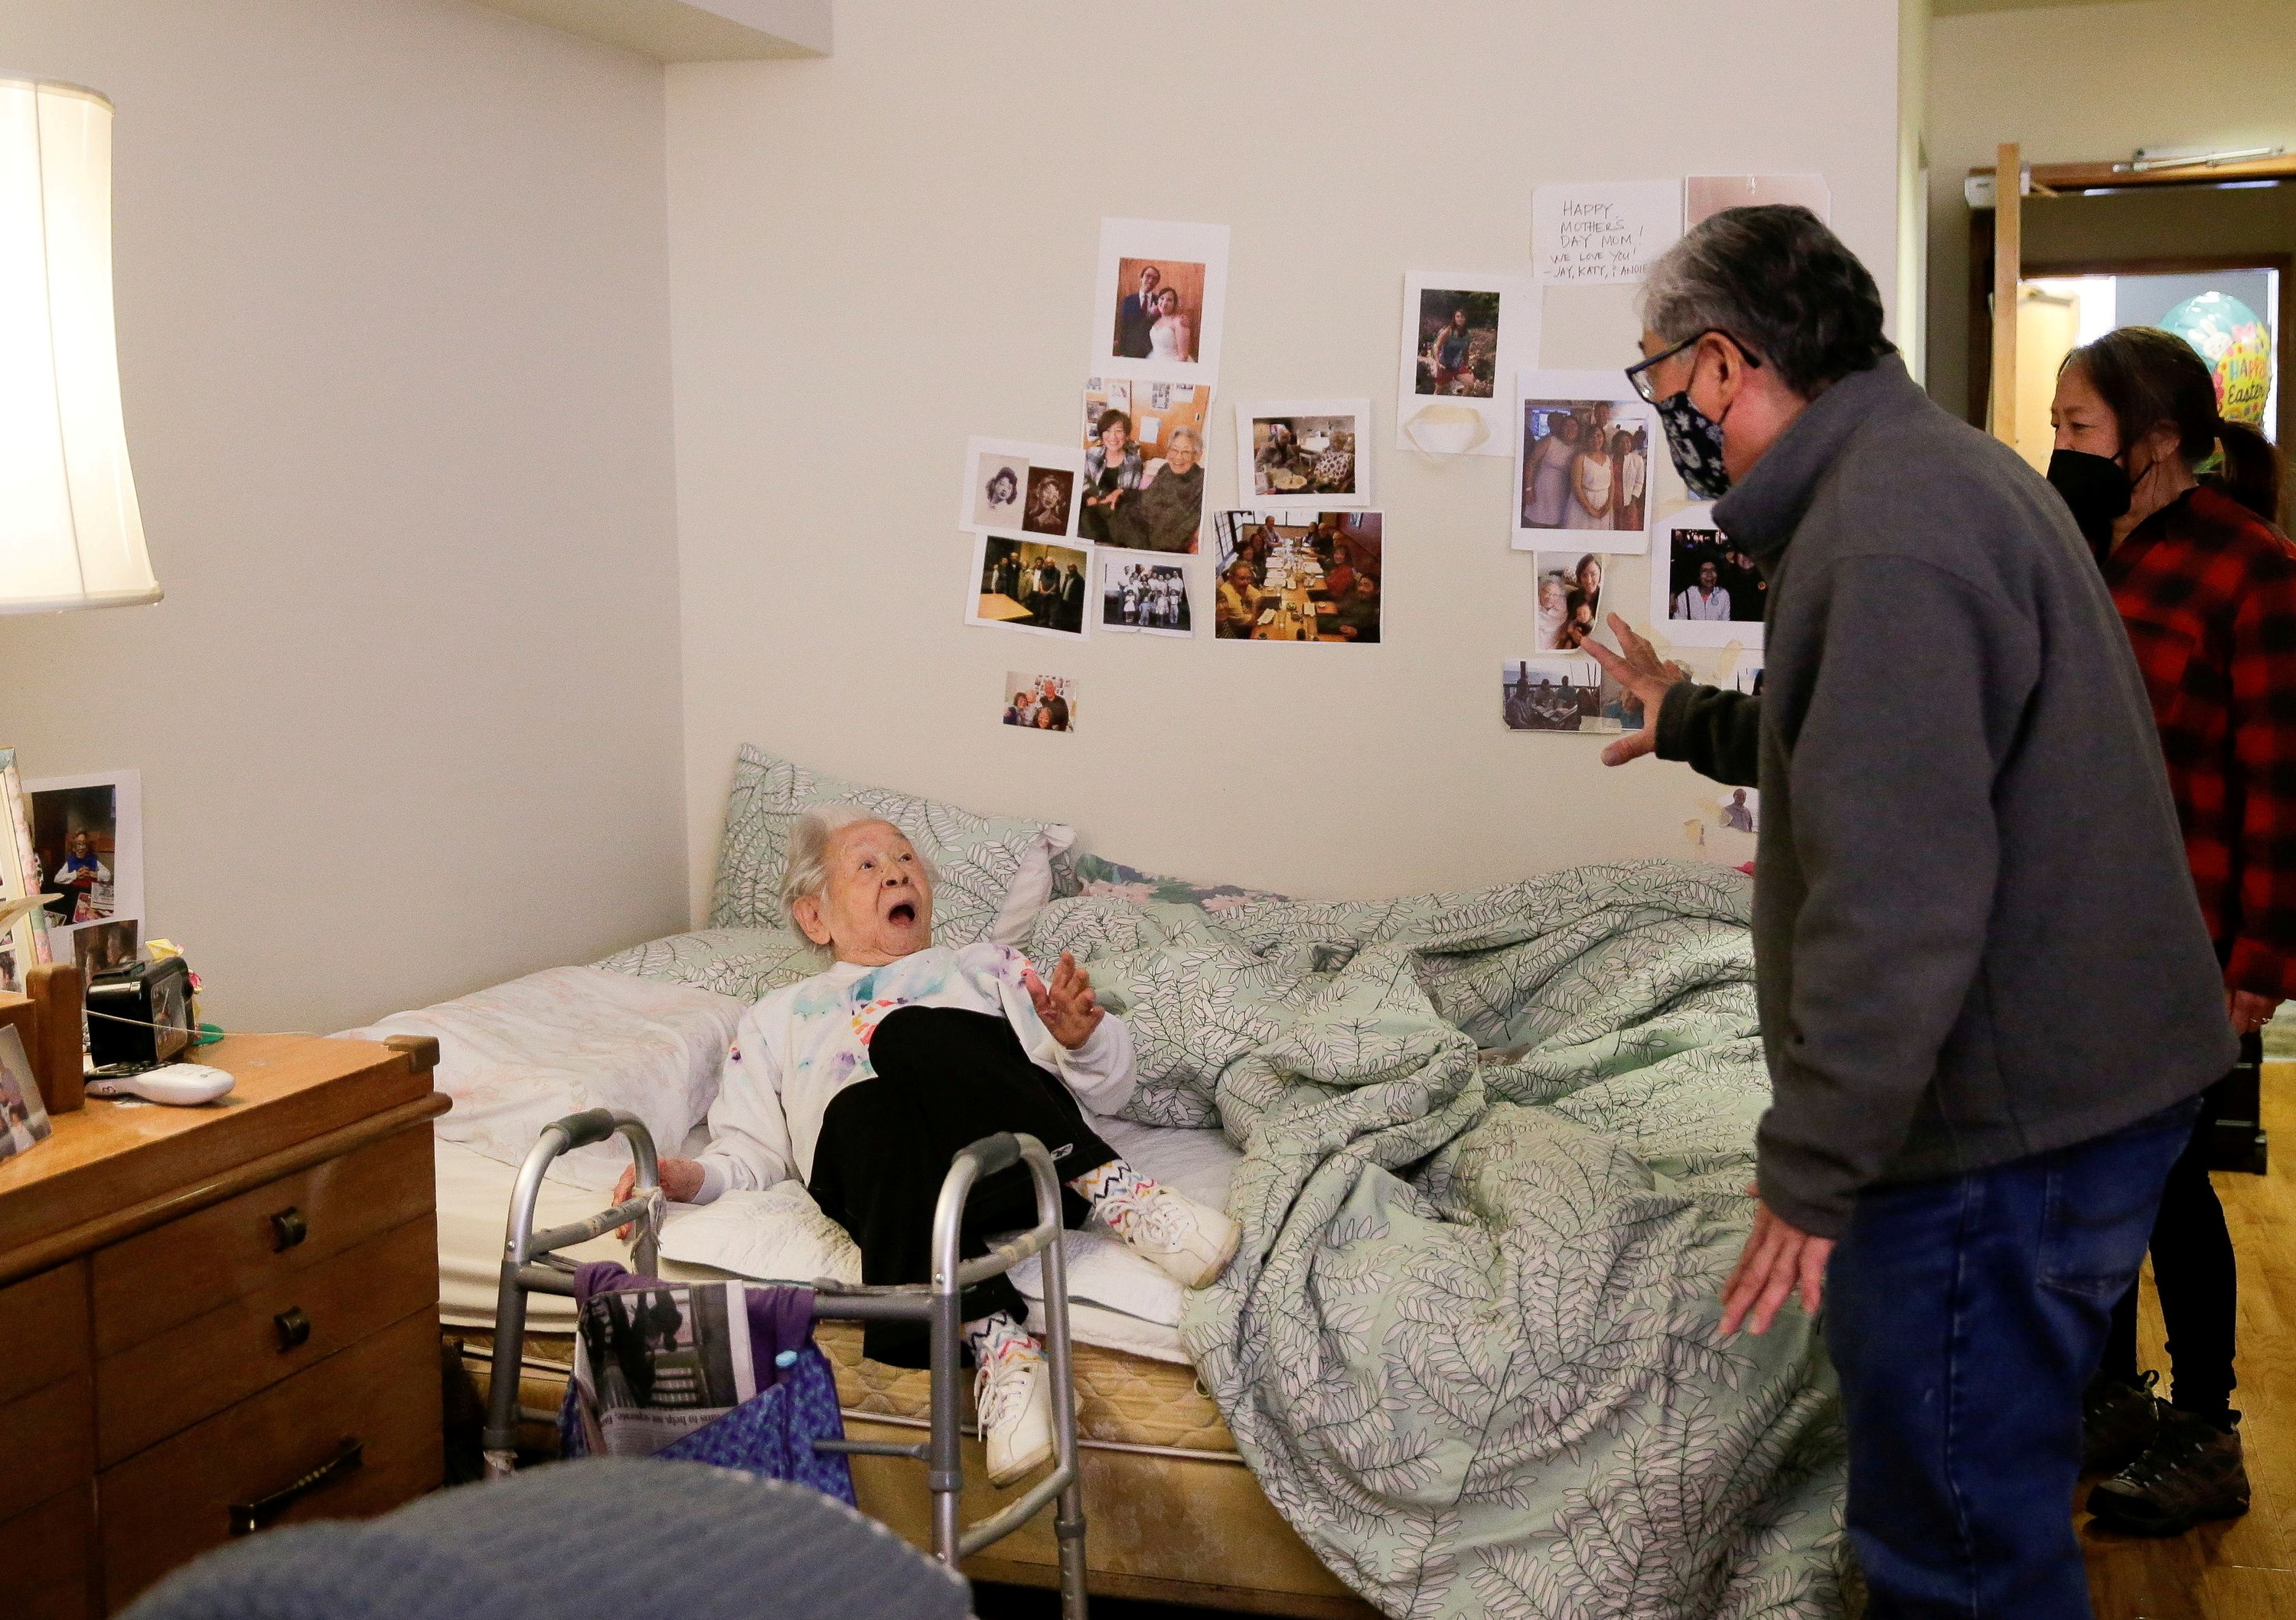 An older woman on a bed looks shocked as a man enters her room with a woman